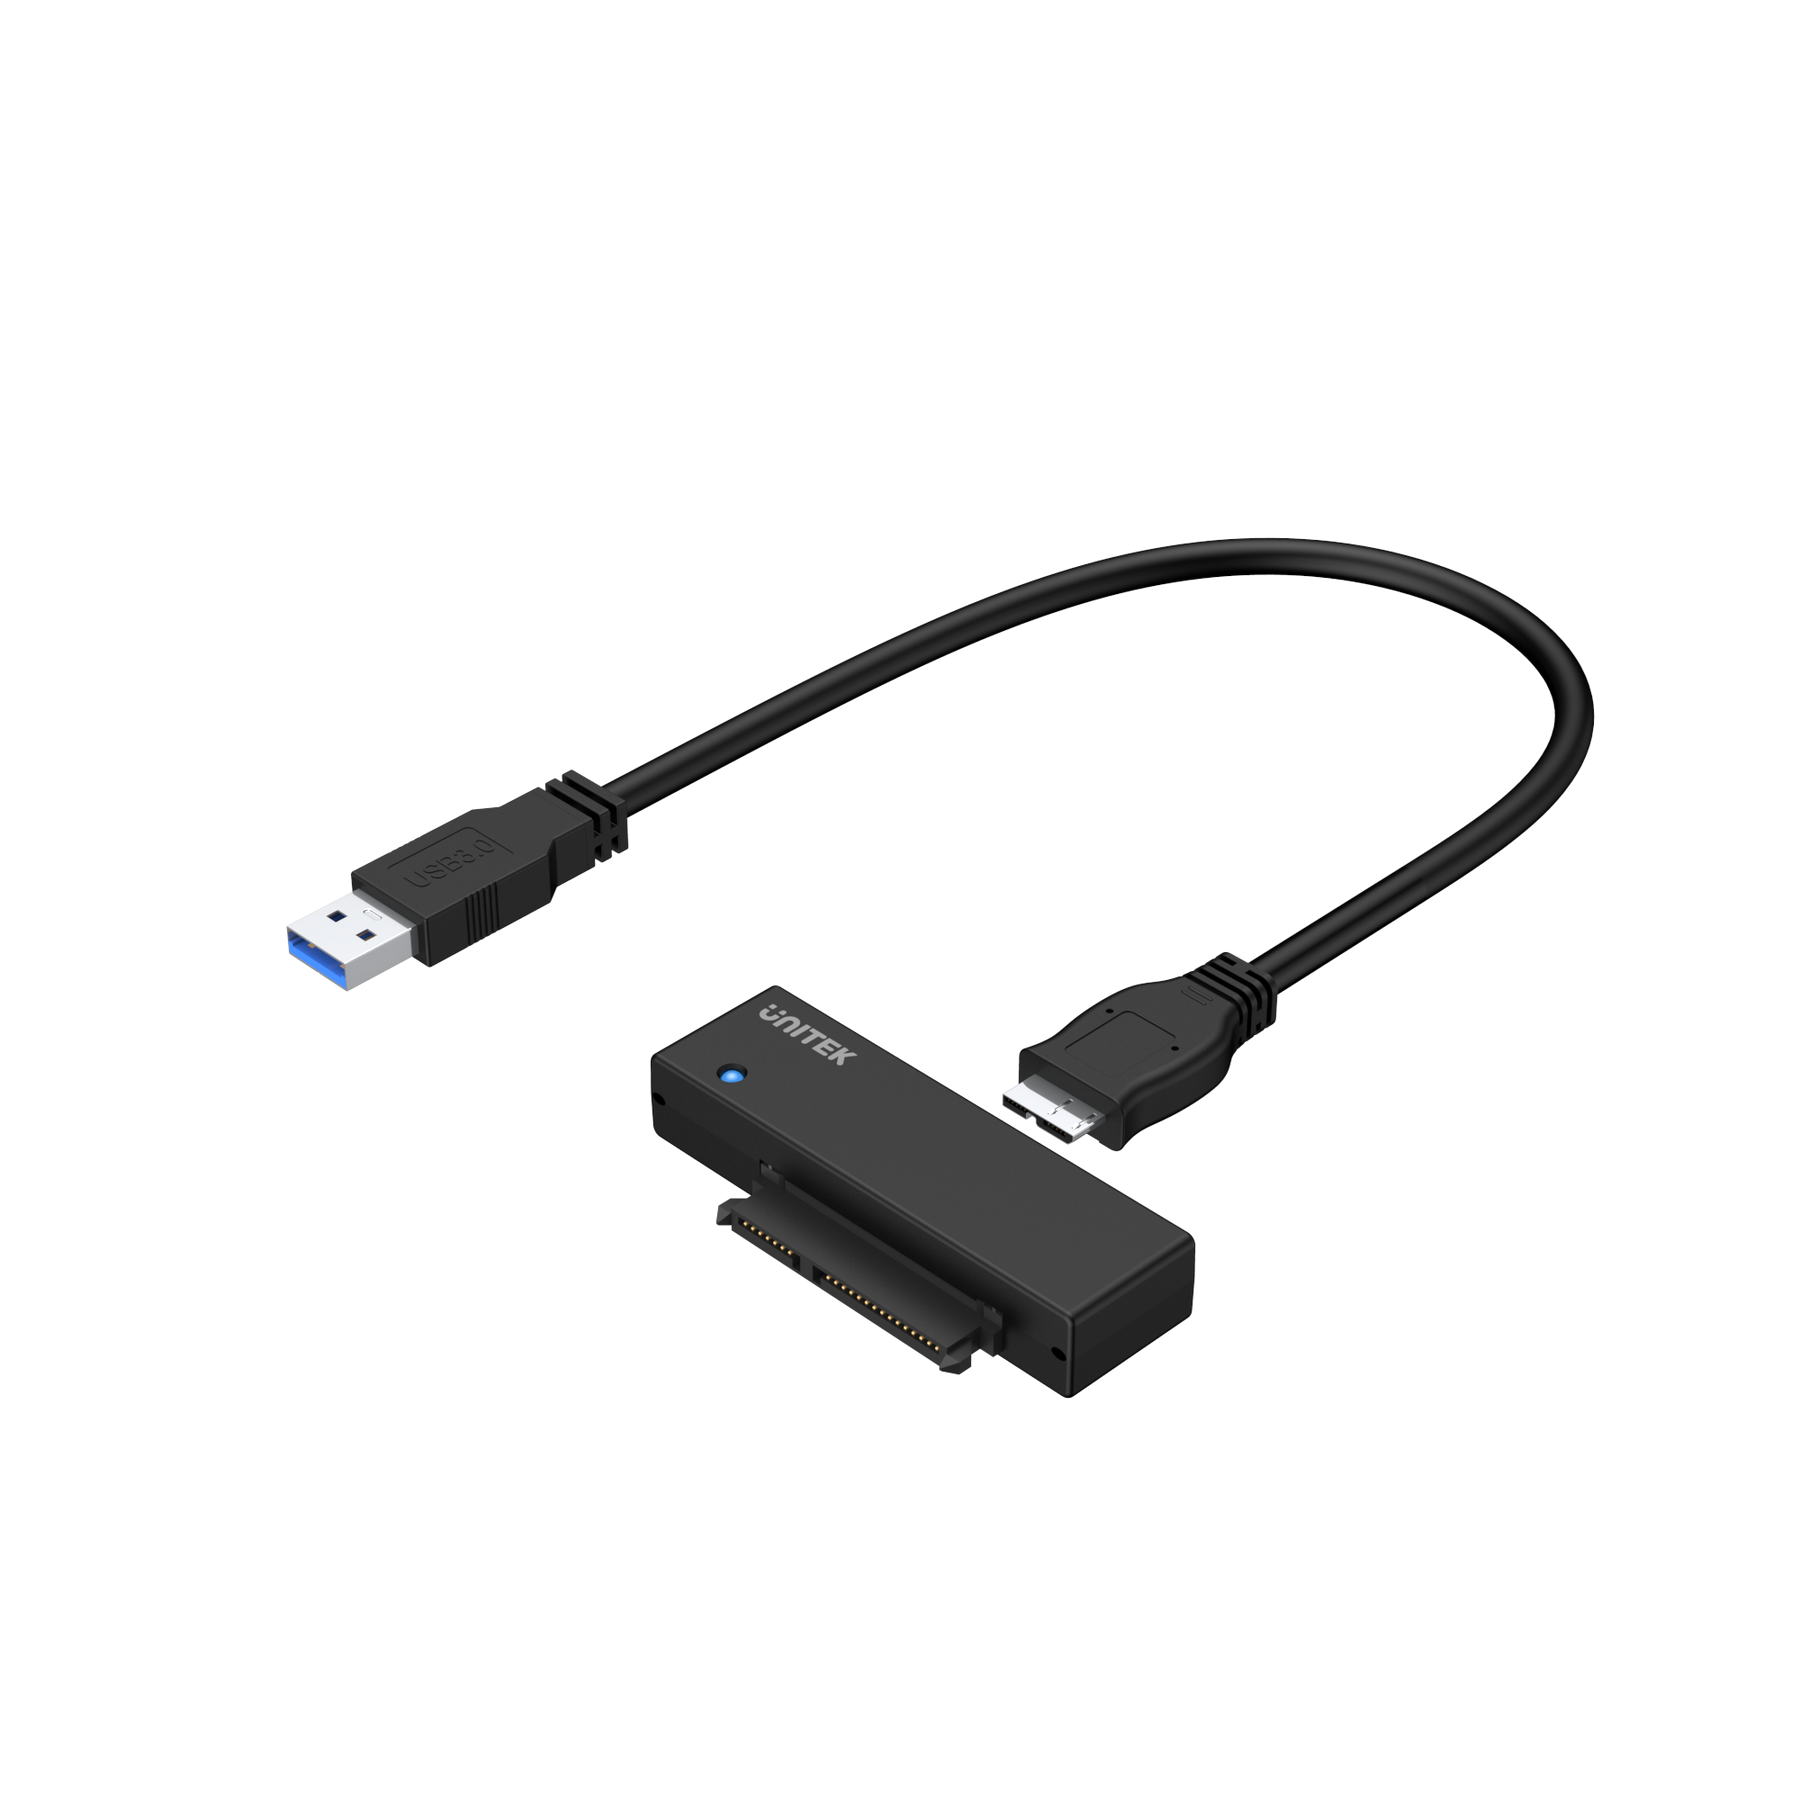 2.5 SATA III to USB 3.0 Adapter Cable - 30cm long